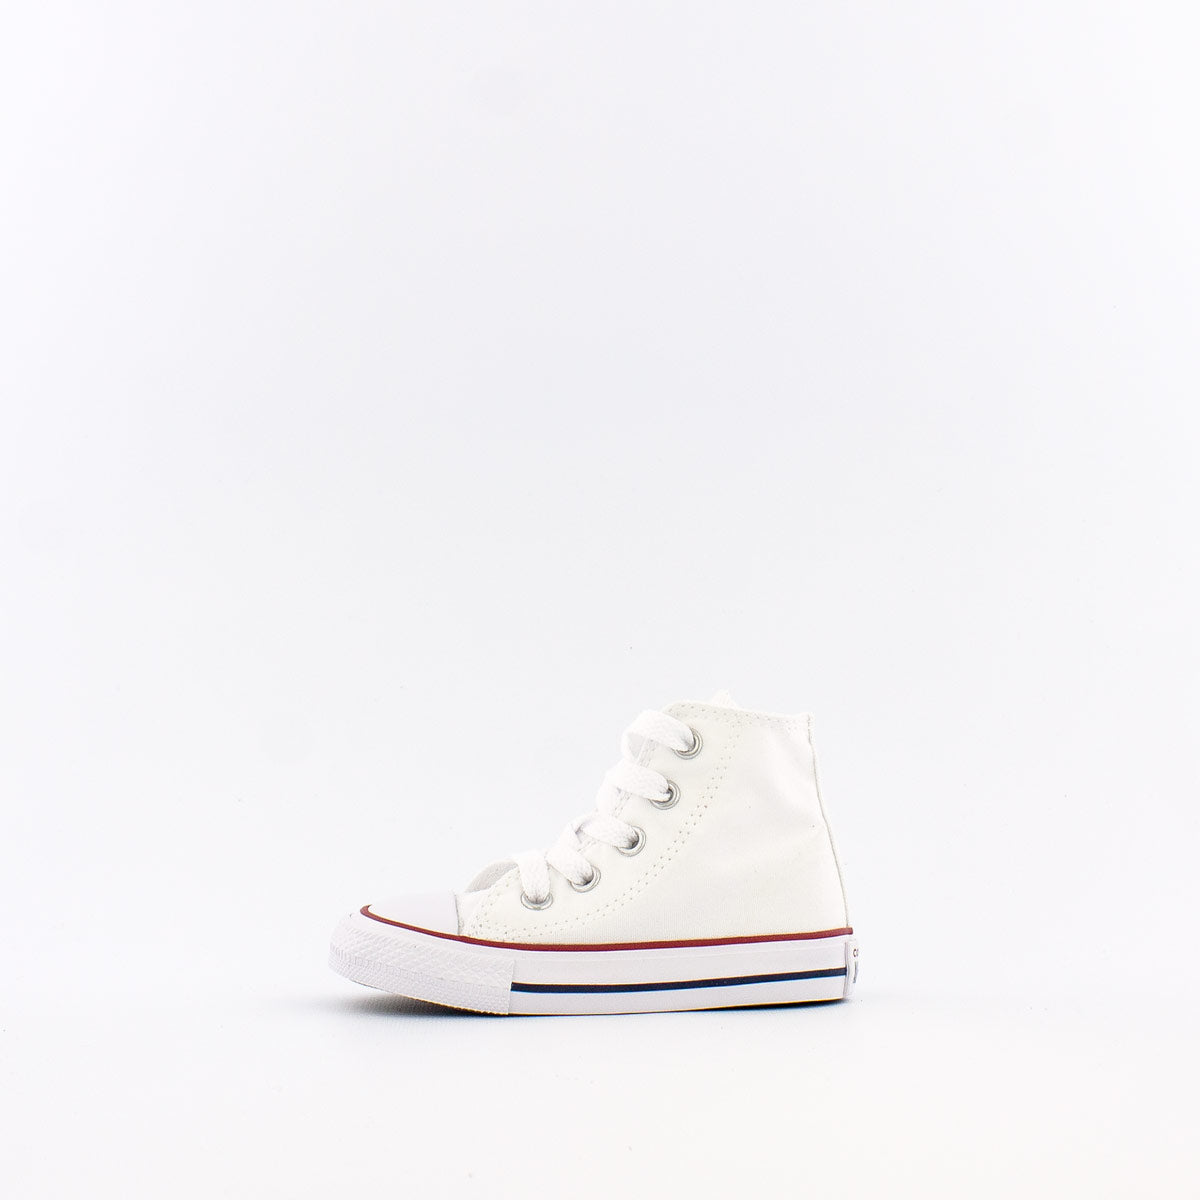 Converse Chuck Taylor All Star High (Infant/Toddler)